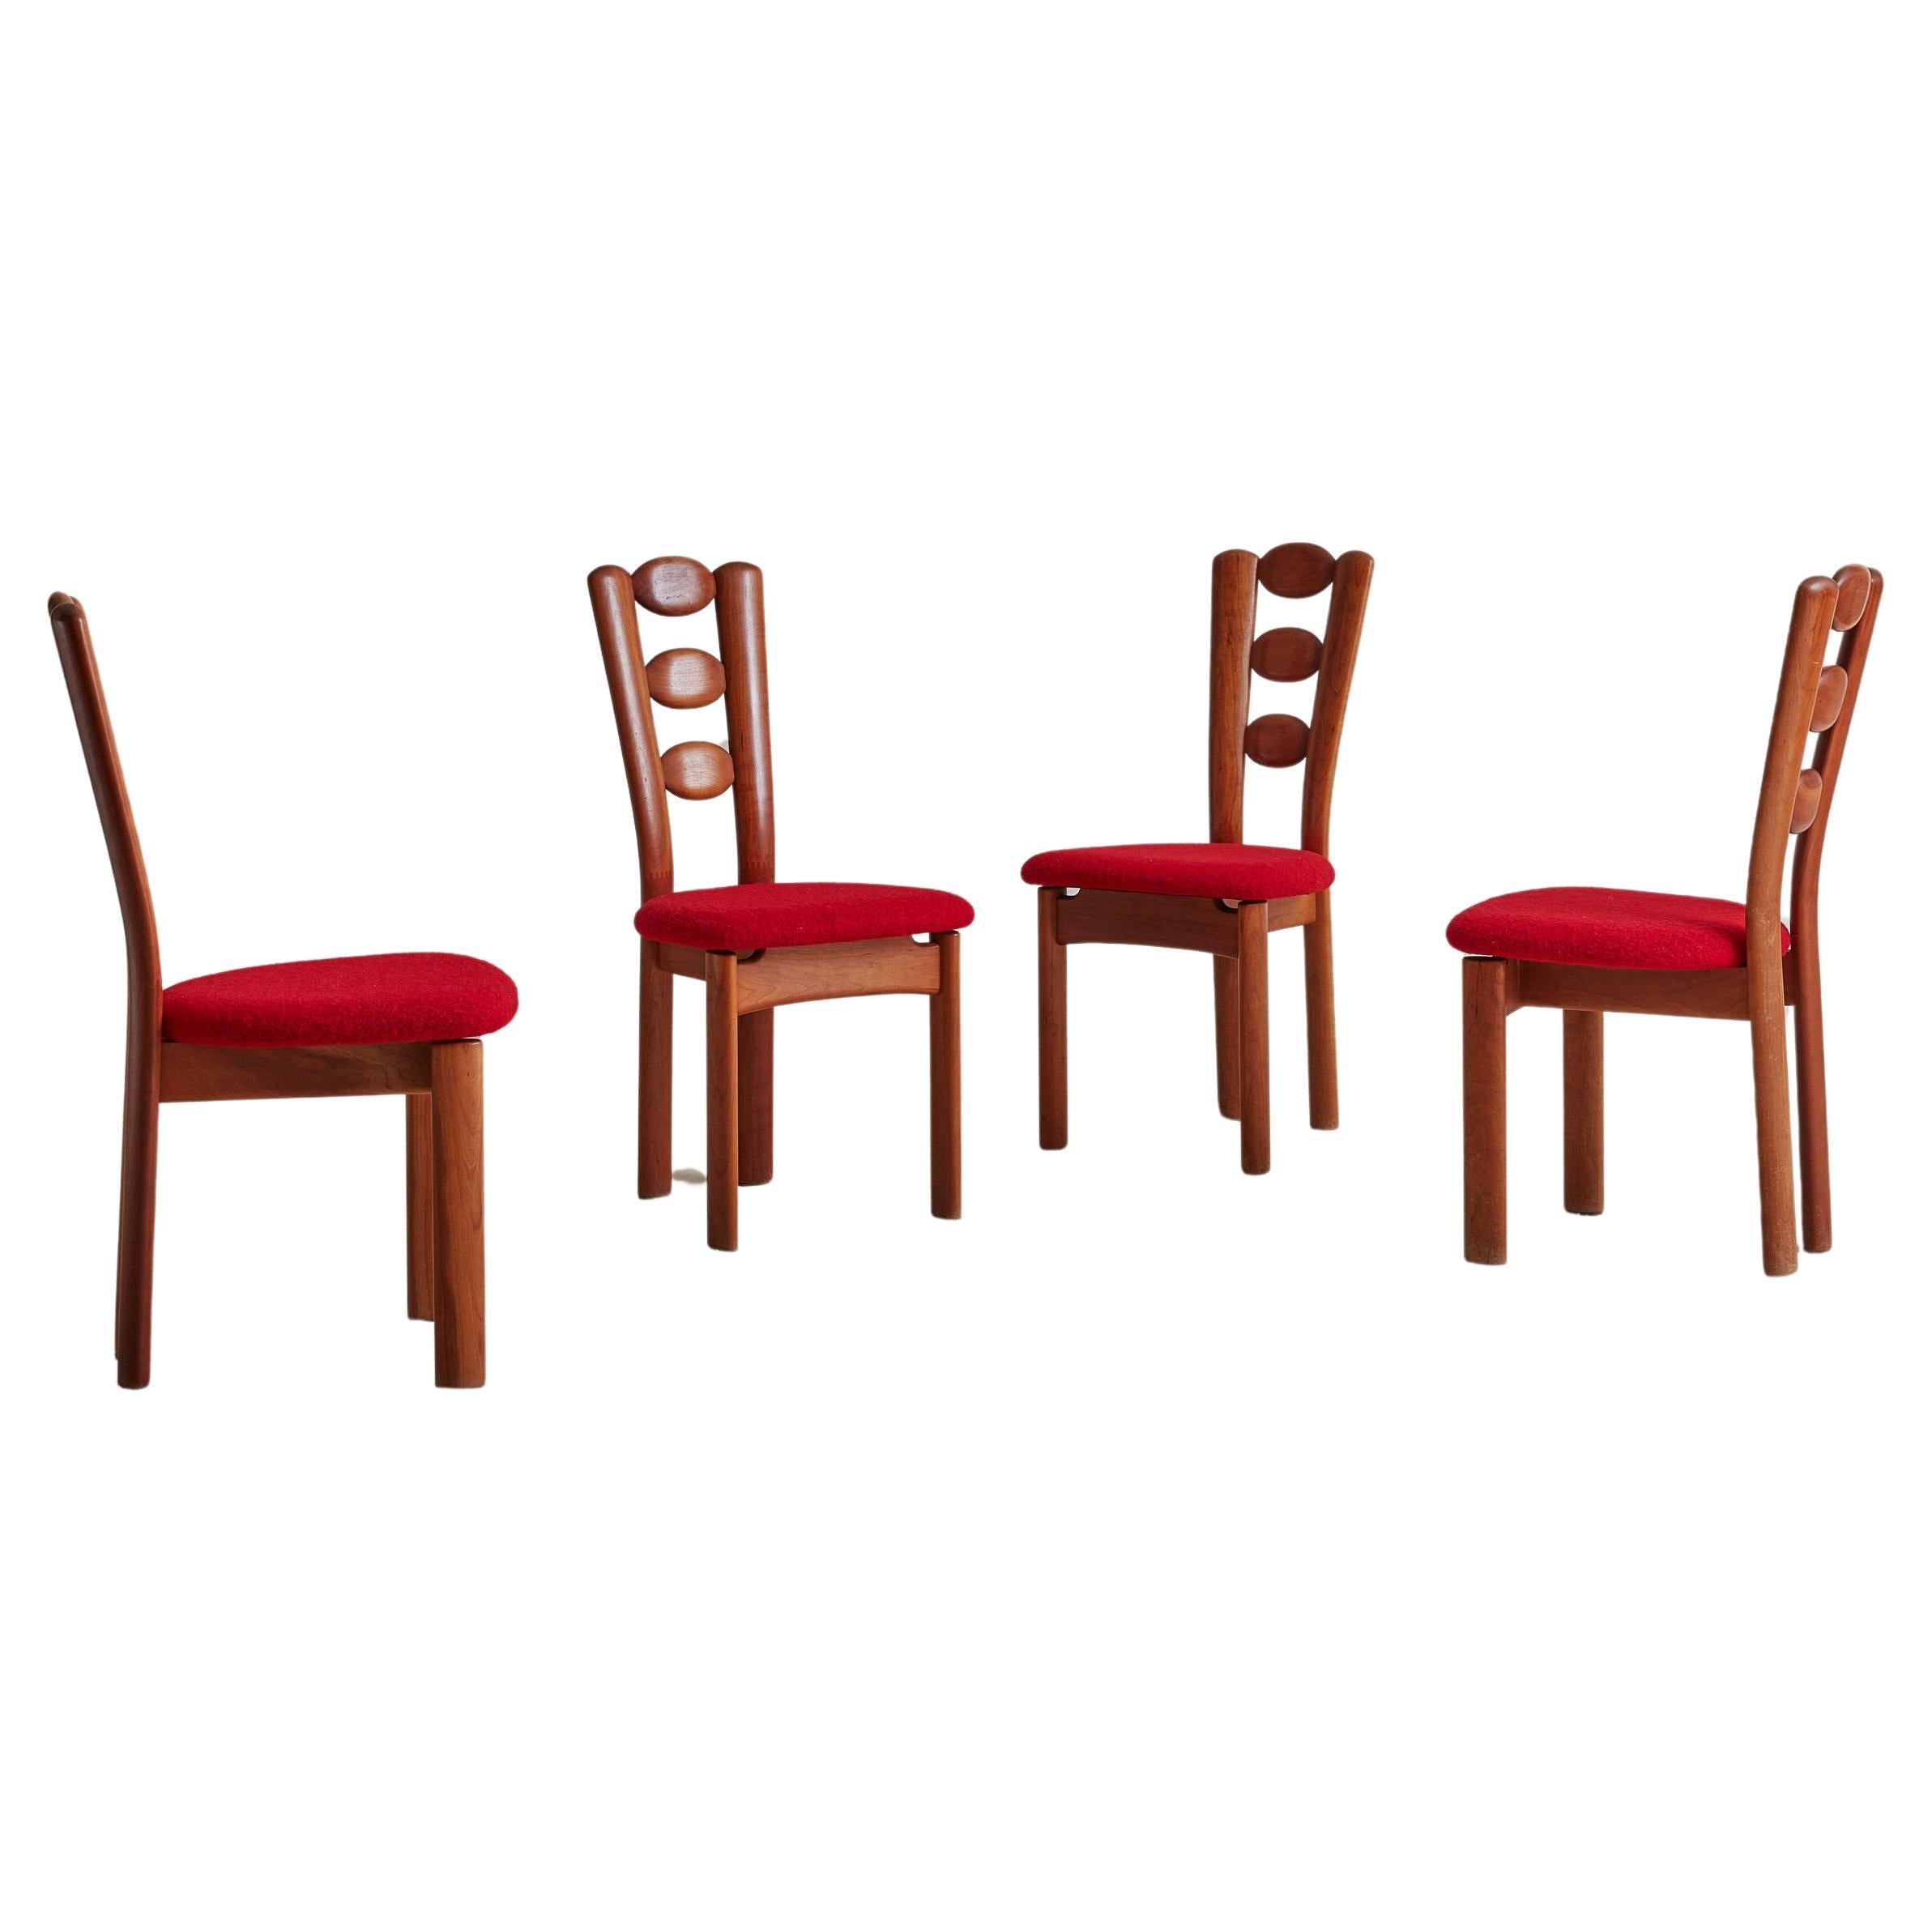 Set of 4 Teak Dining Chairs, Denmark 1960s For Sale